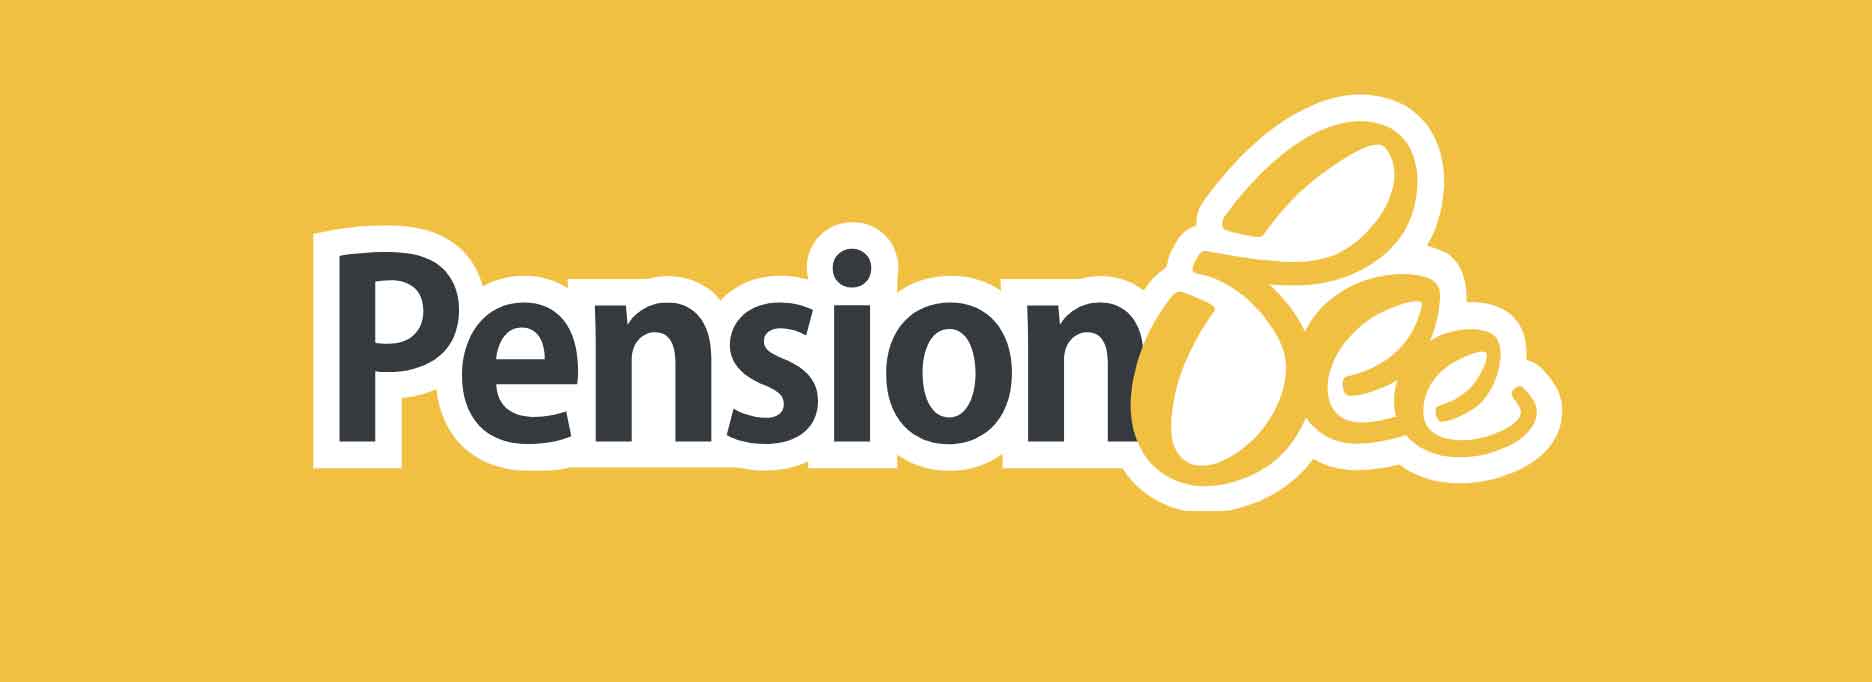 PensionBee to offer customers access to IPO